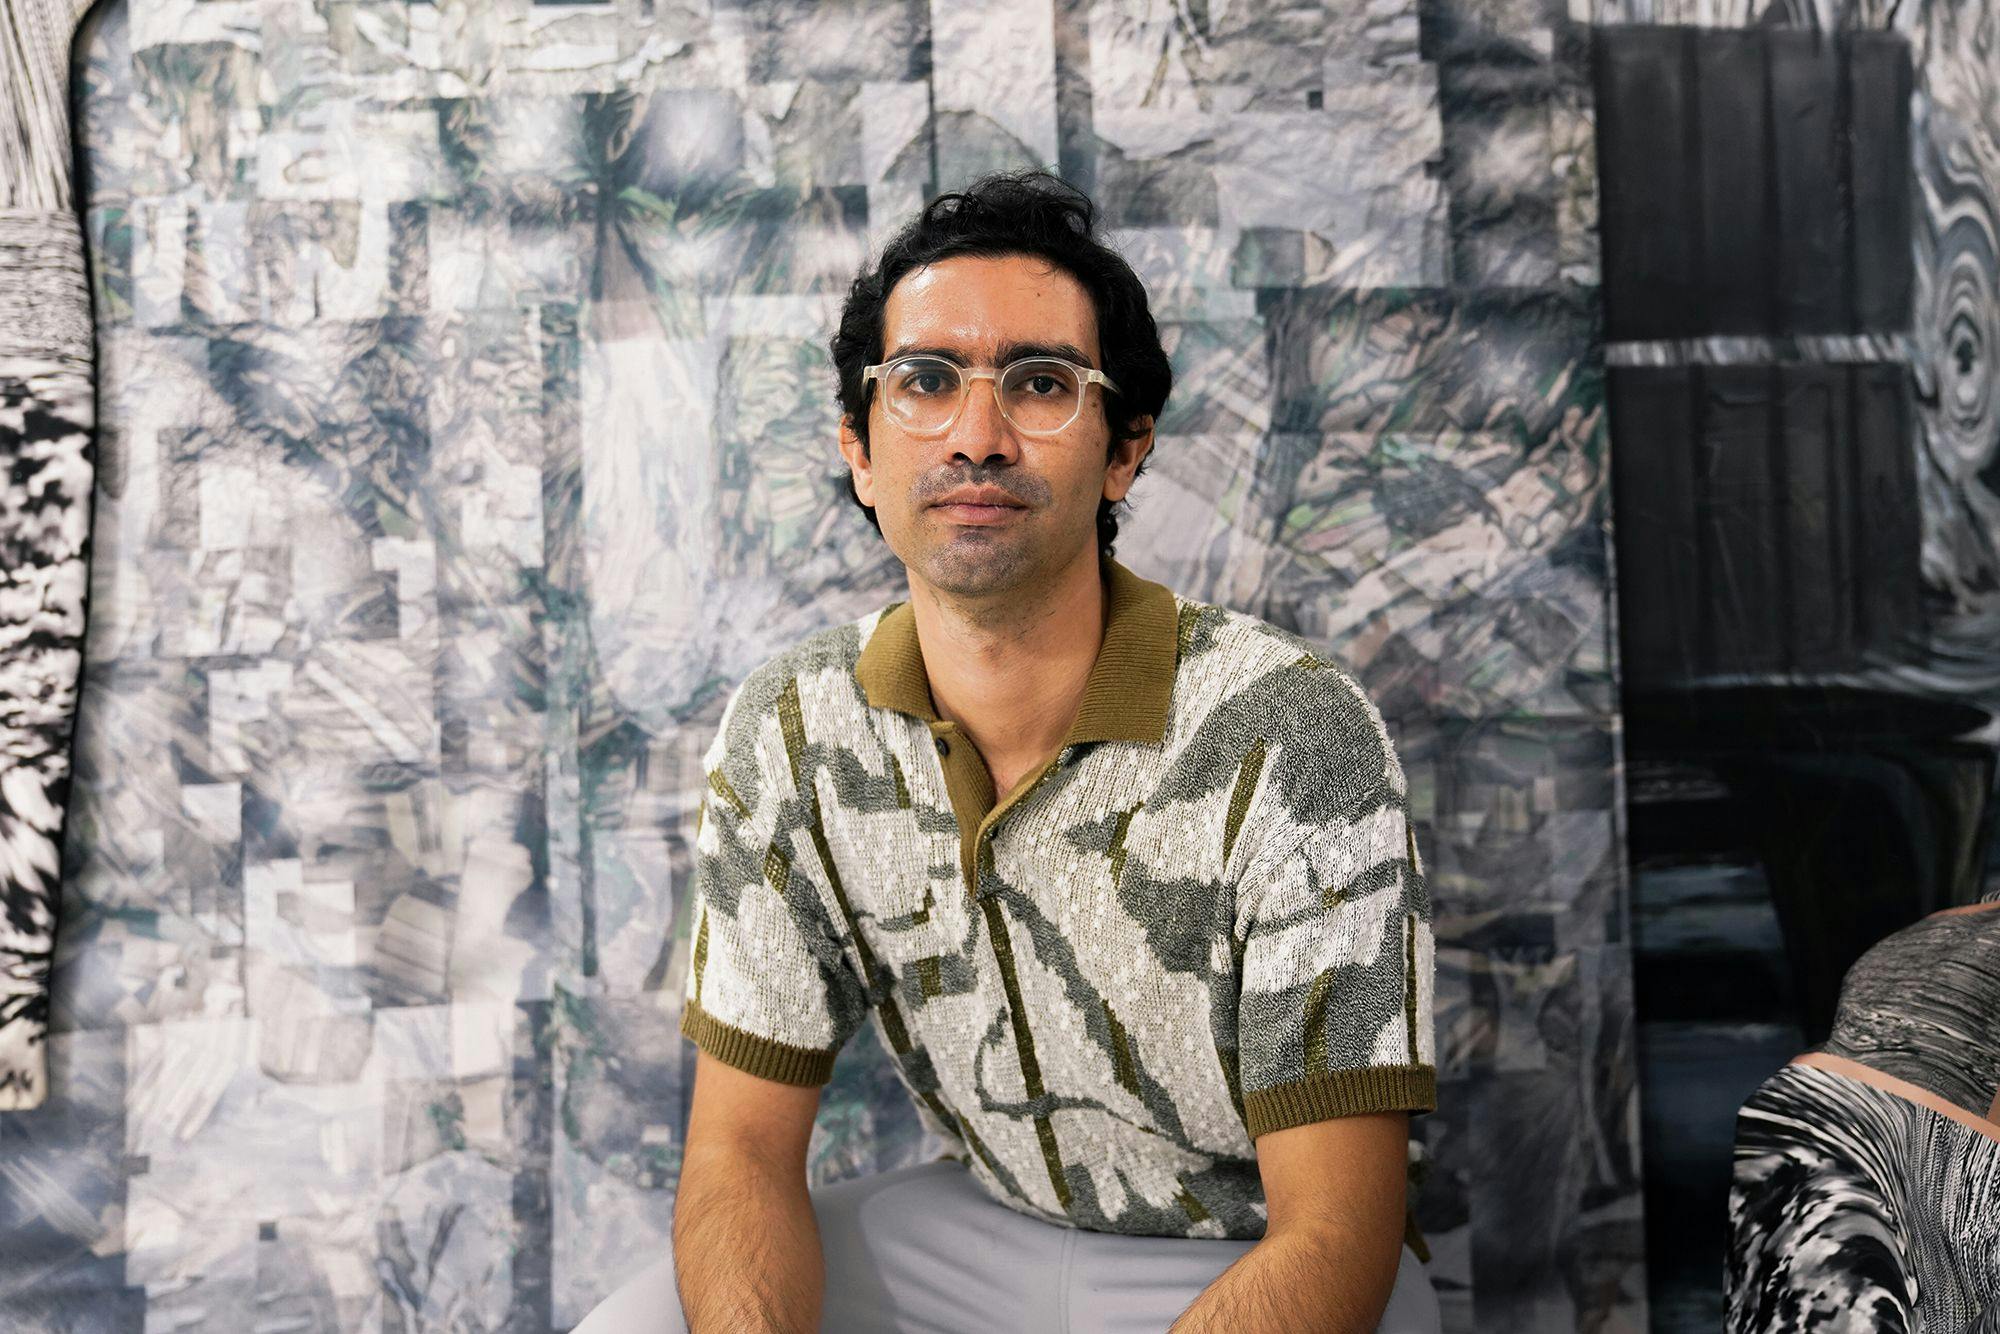 A portrait of a Latin American man with clear glasses and dark wavy hair, sitting in front of a patterned grayscale backdrop. He wears a woven shirt with an olive collar and a geometric design.